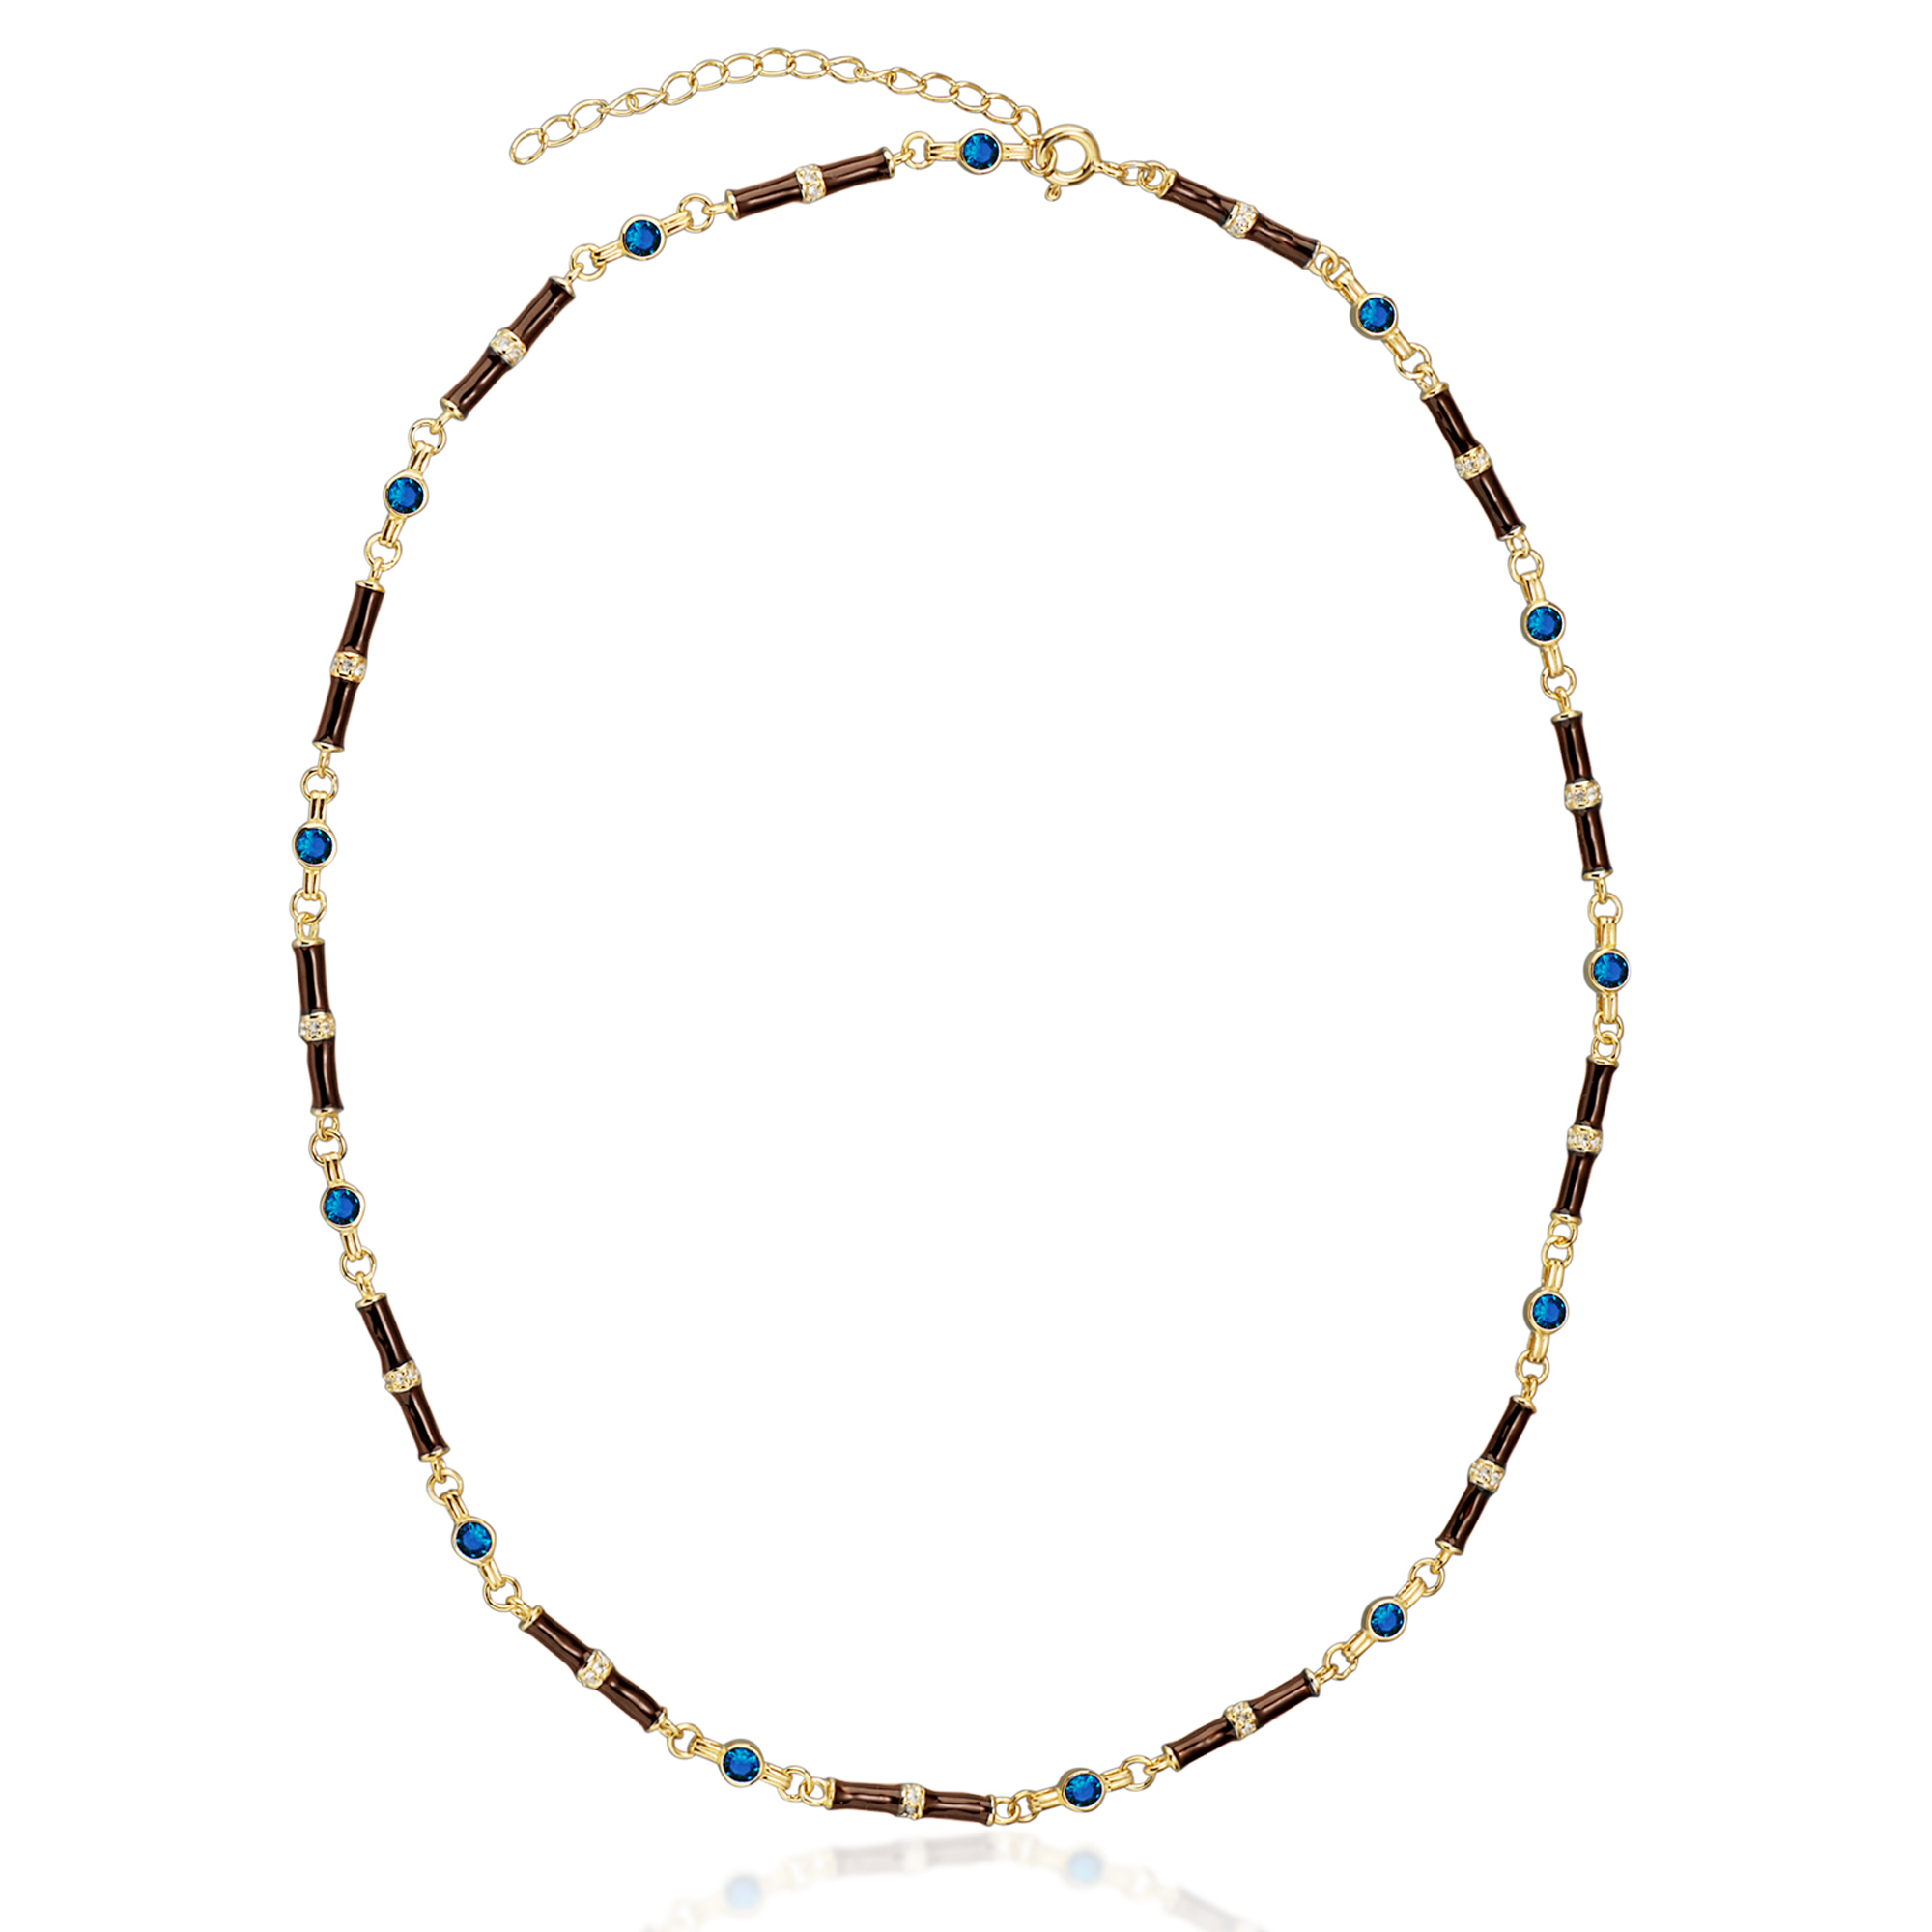 Marlowe Brown Enamel Necklace with Sapphire Blue Stone